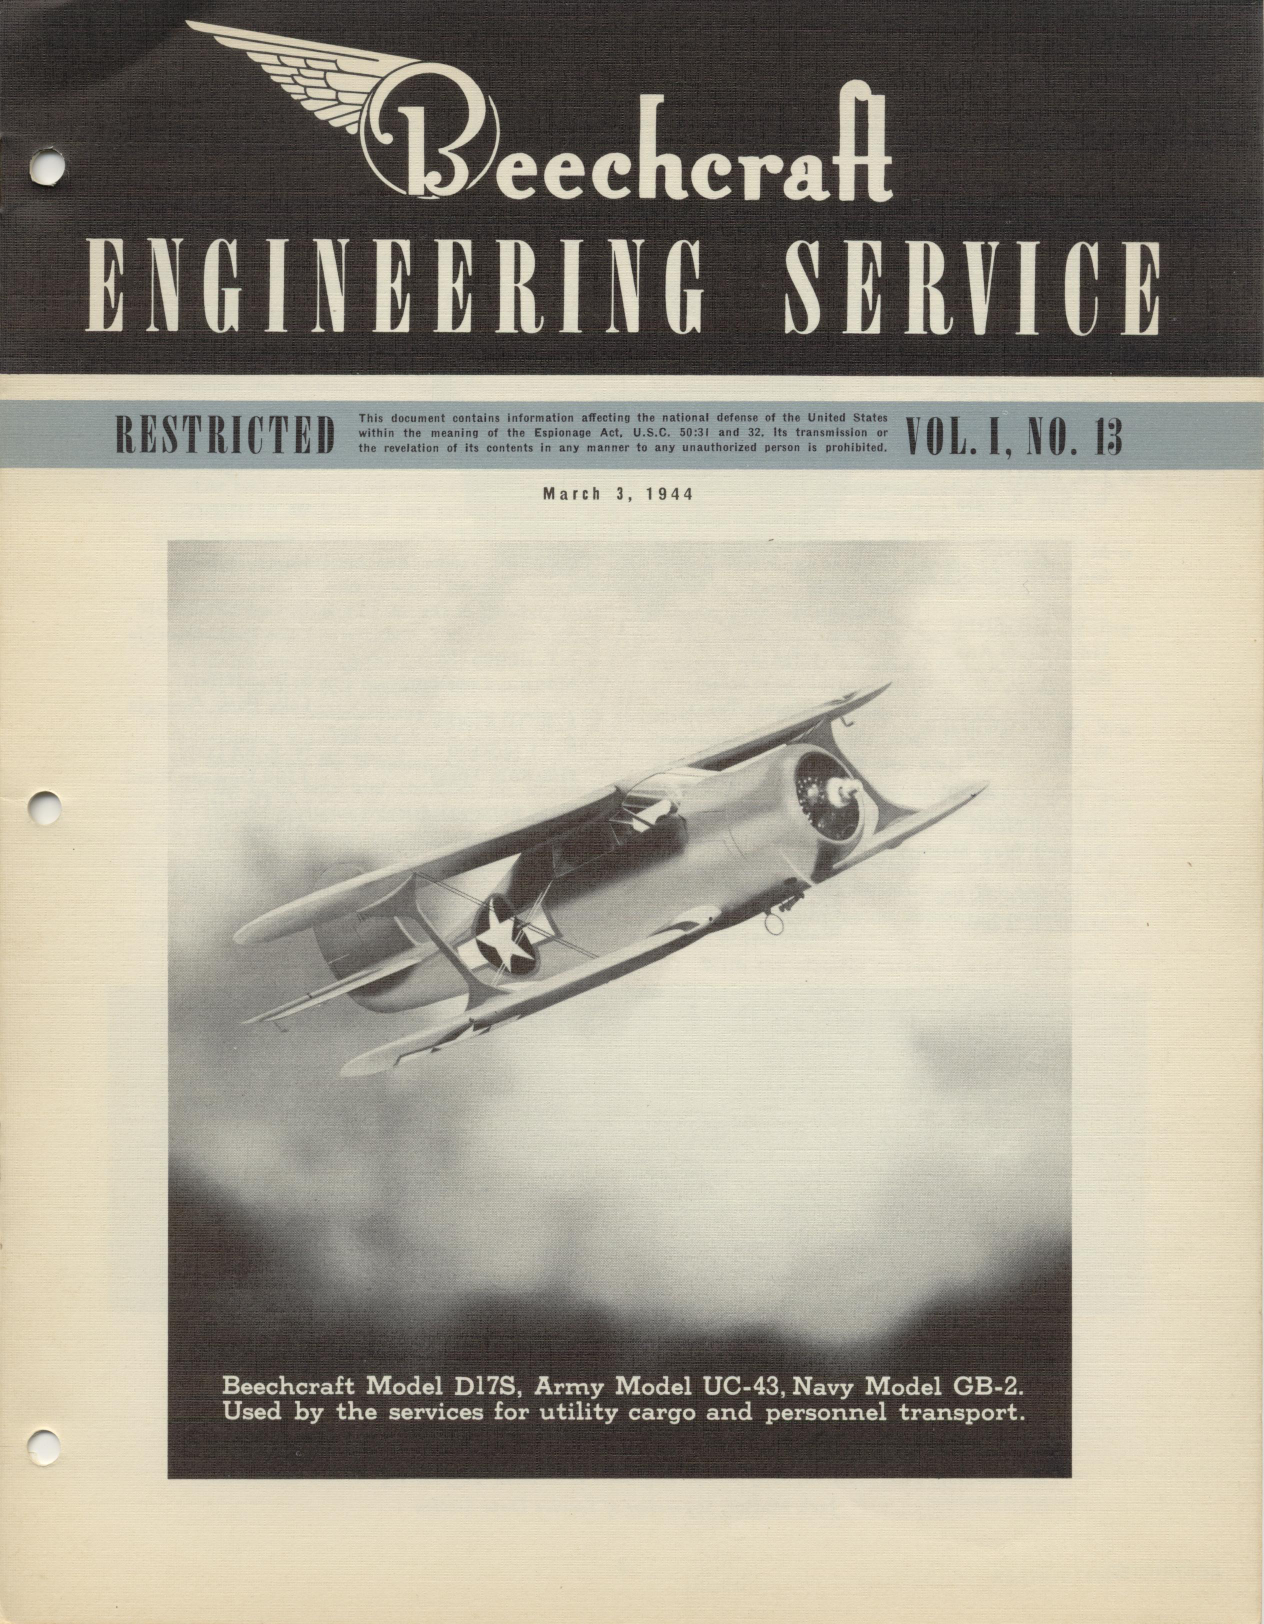 Sample page 1 from AirCorps Library document: Vol. I, No. 13 - Beechcraft Engineering Service